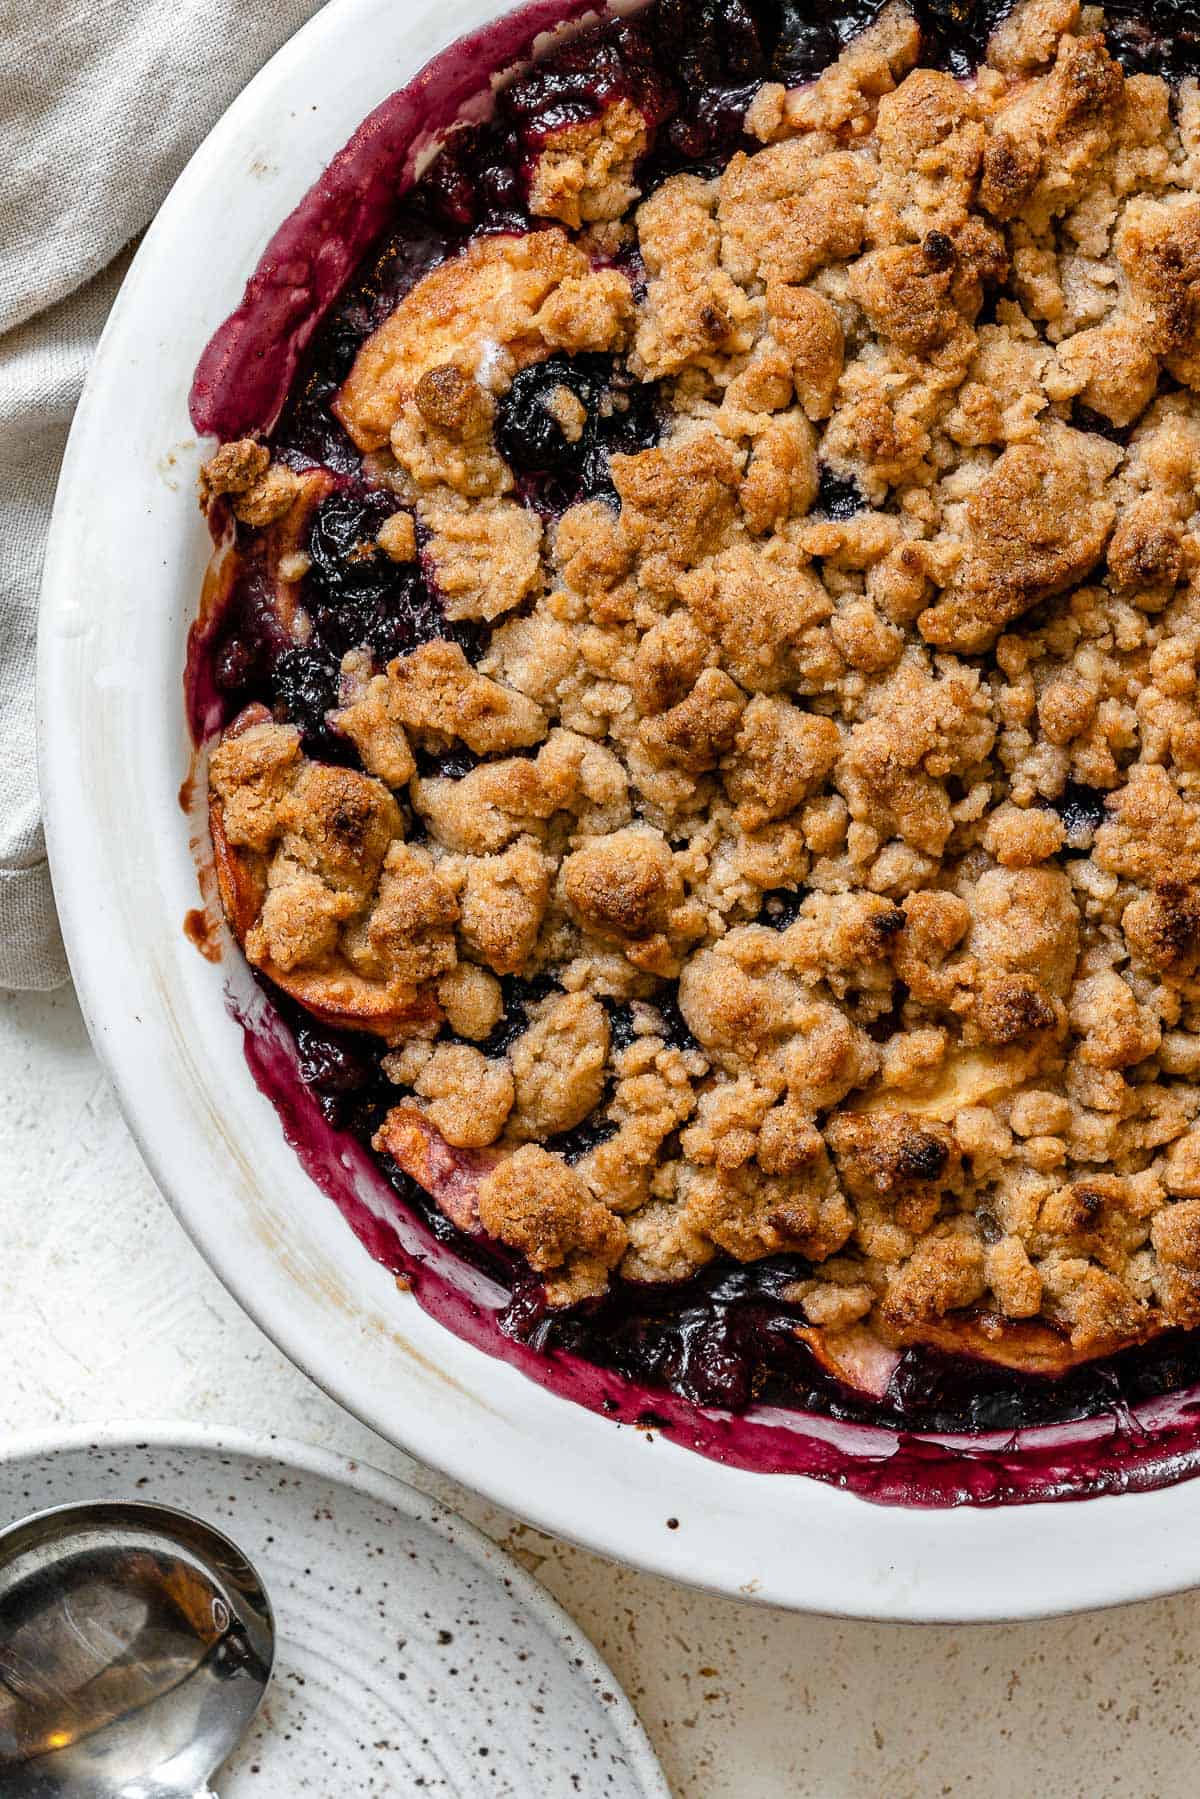 completed Apple and Blueberry Crumble against a light background